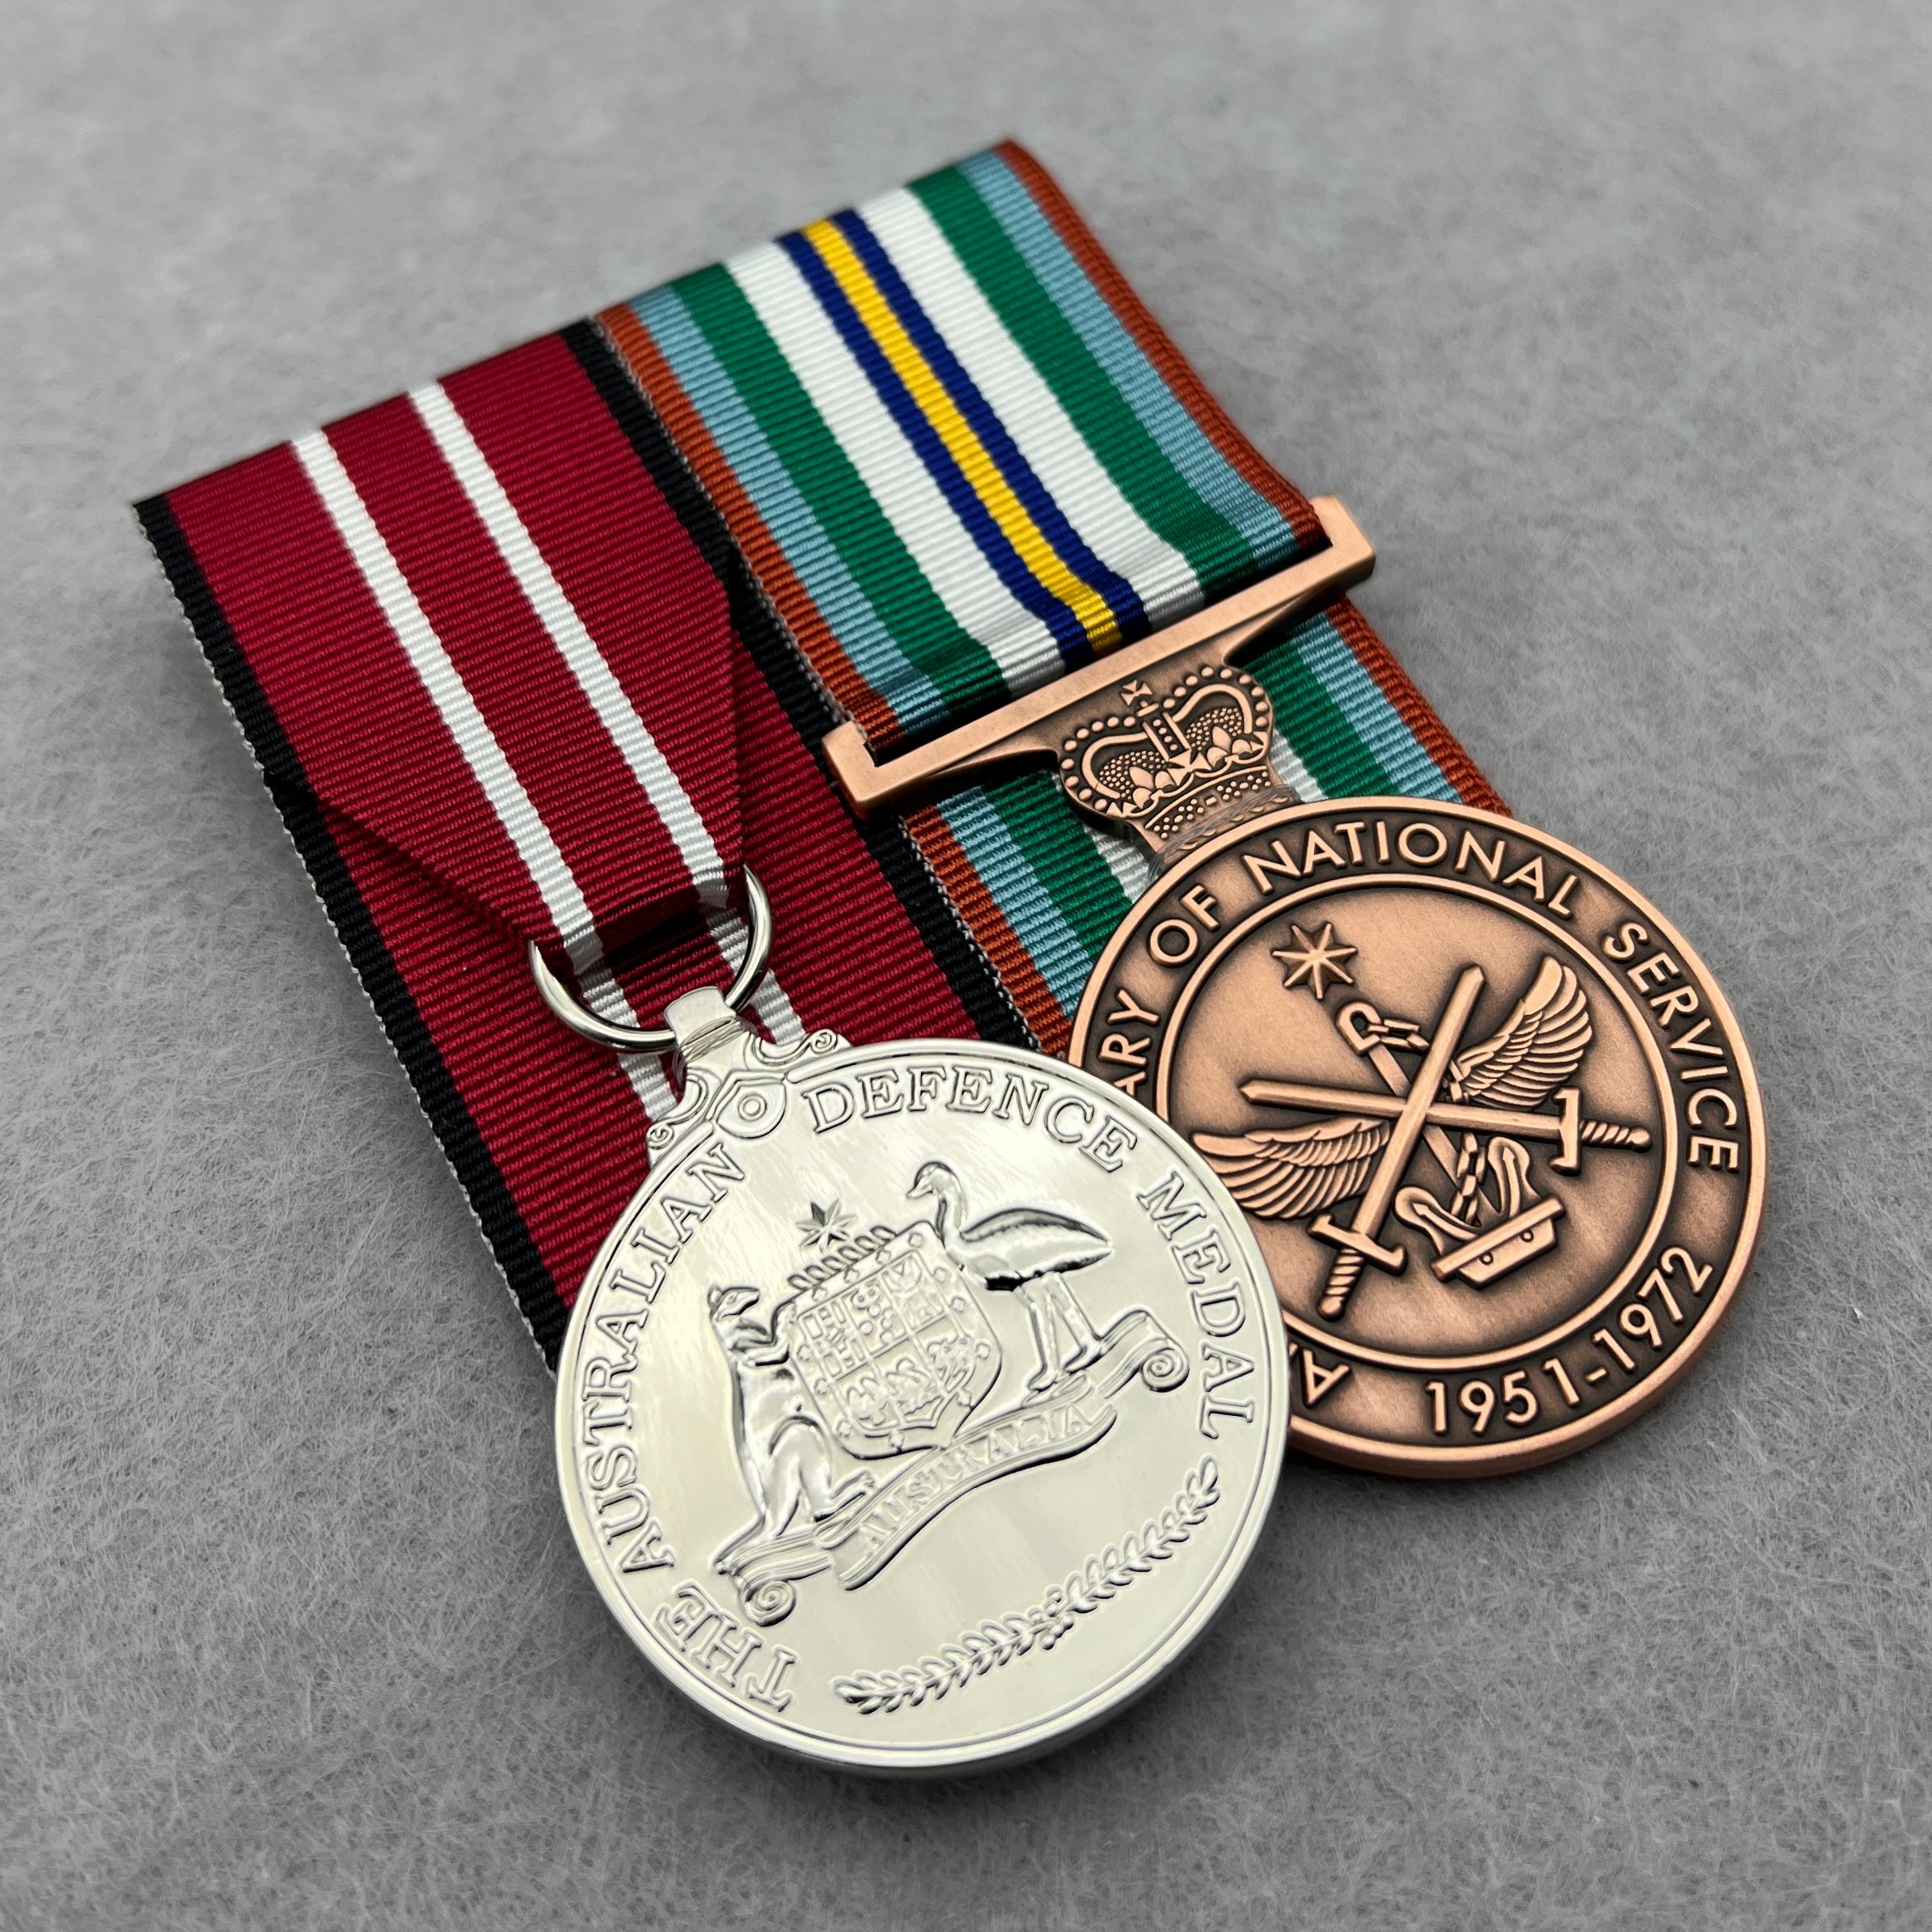 Australian Defence Medal / Anniversary of National Service Duo - Foxhole Medals